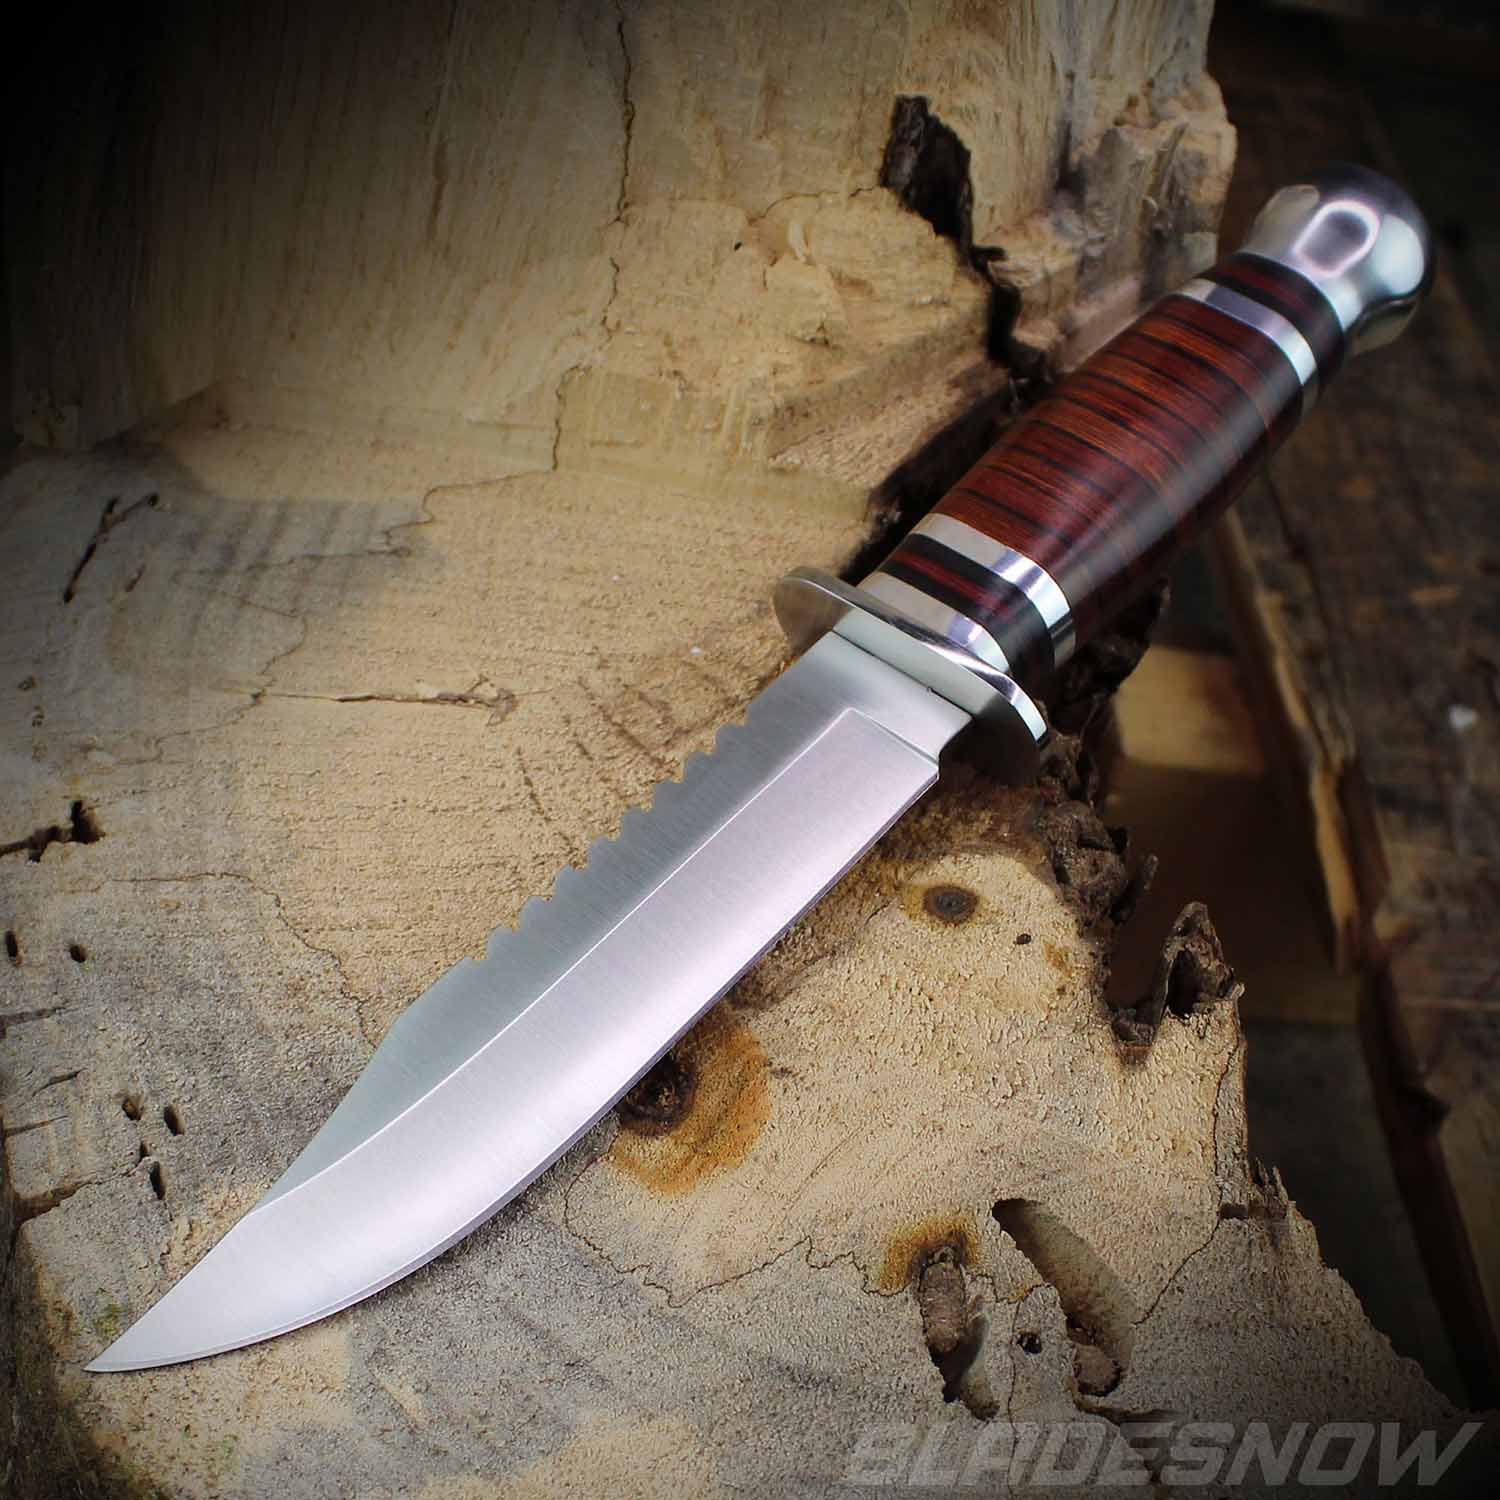 16.5 LARGE WOOD HANDLE BOWIE HUNTING KNIFE w/ SHEATH Fixed Blade